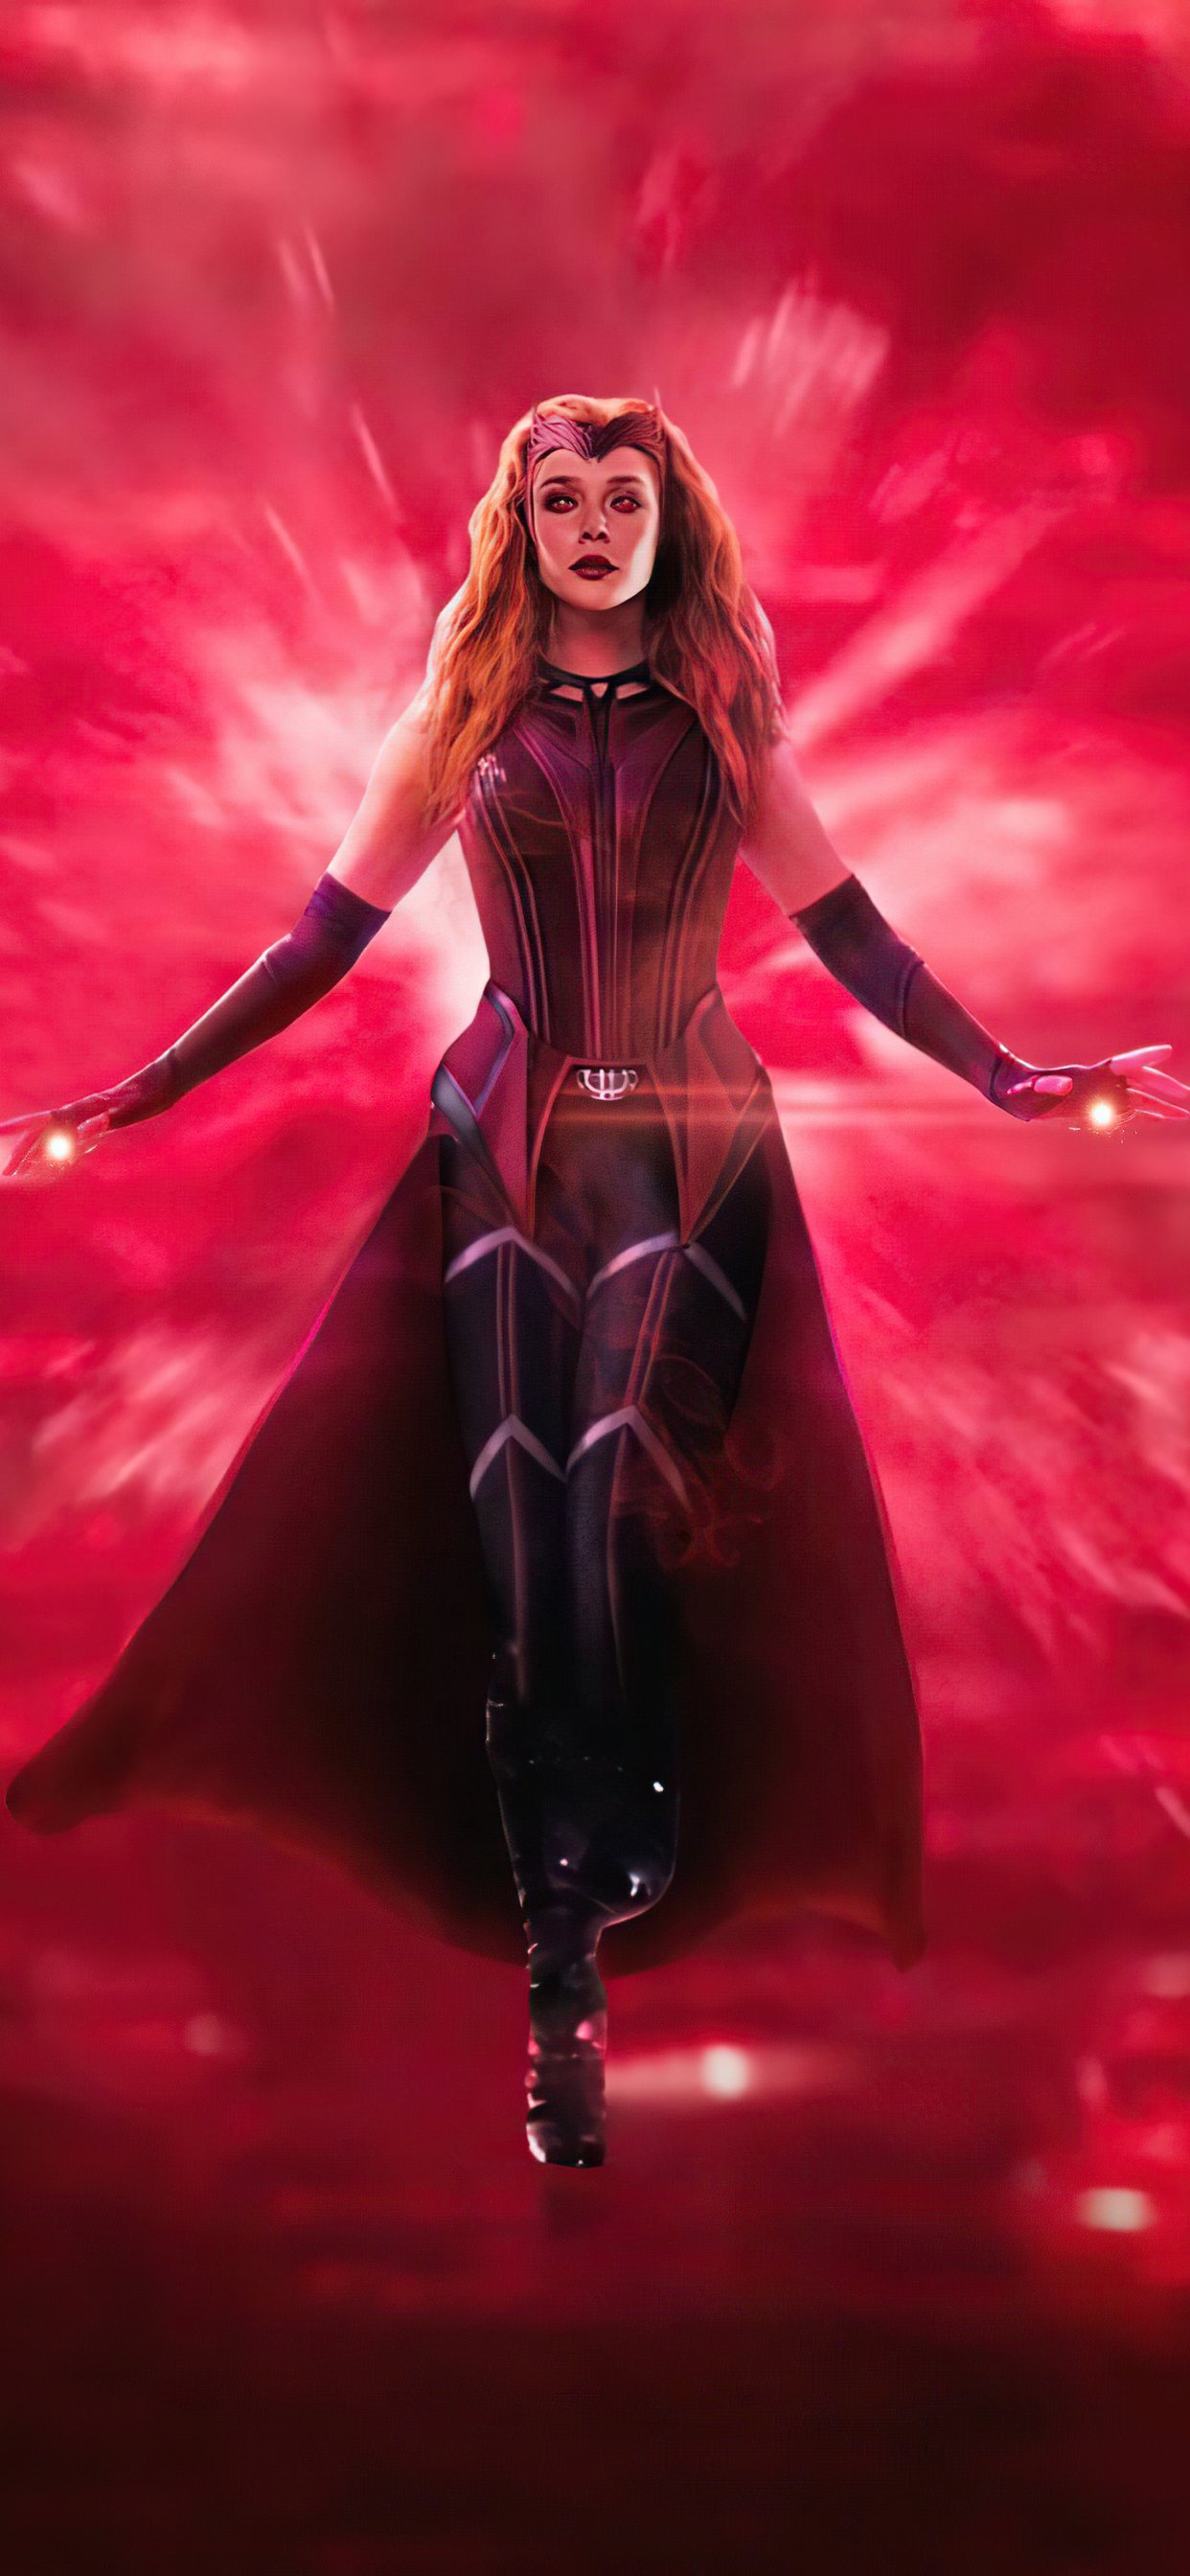 The Scarlet Witch Wanda Maximoff From Marvel HD Tv Shows 4k Wallpapers  Images Backgrounds Photos and Pictures